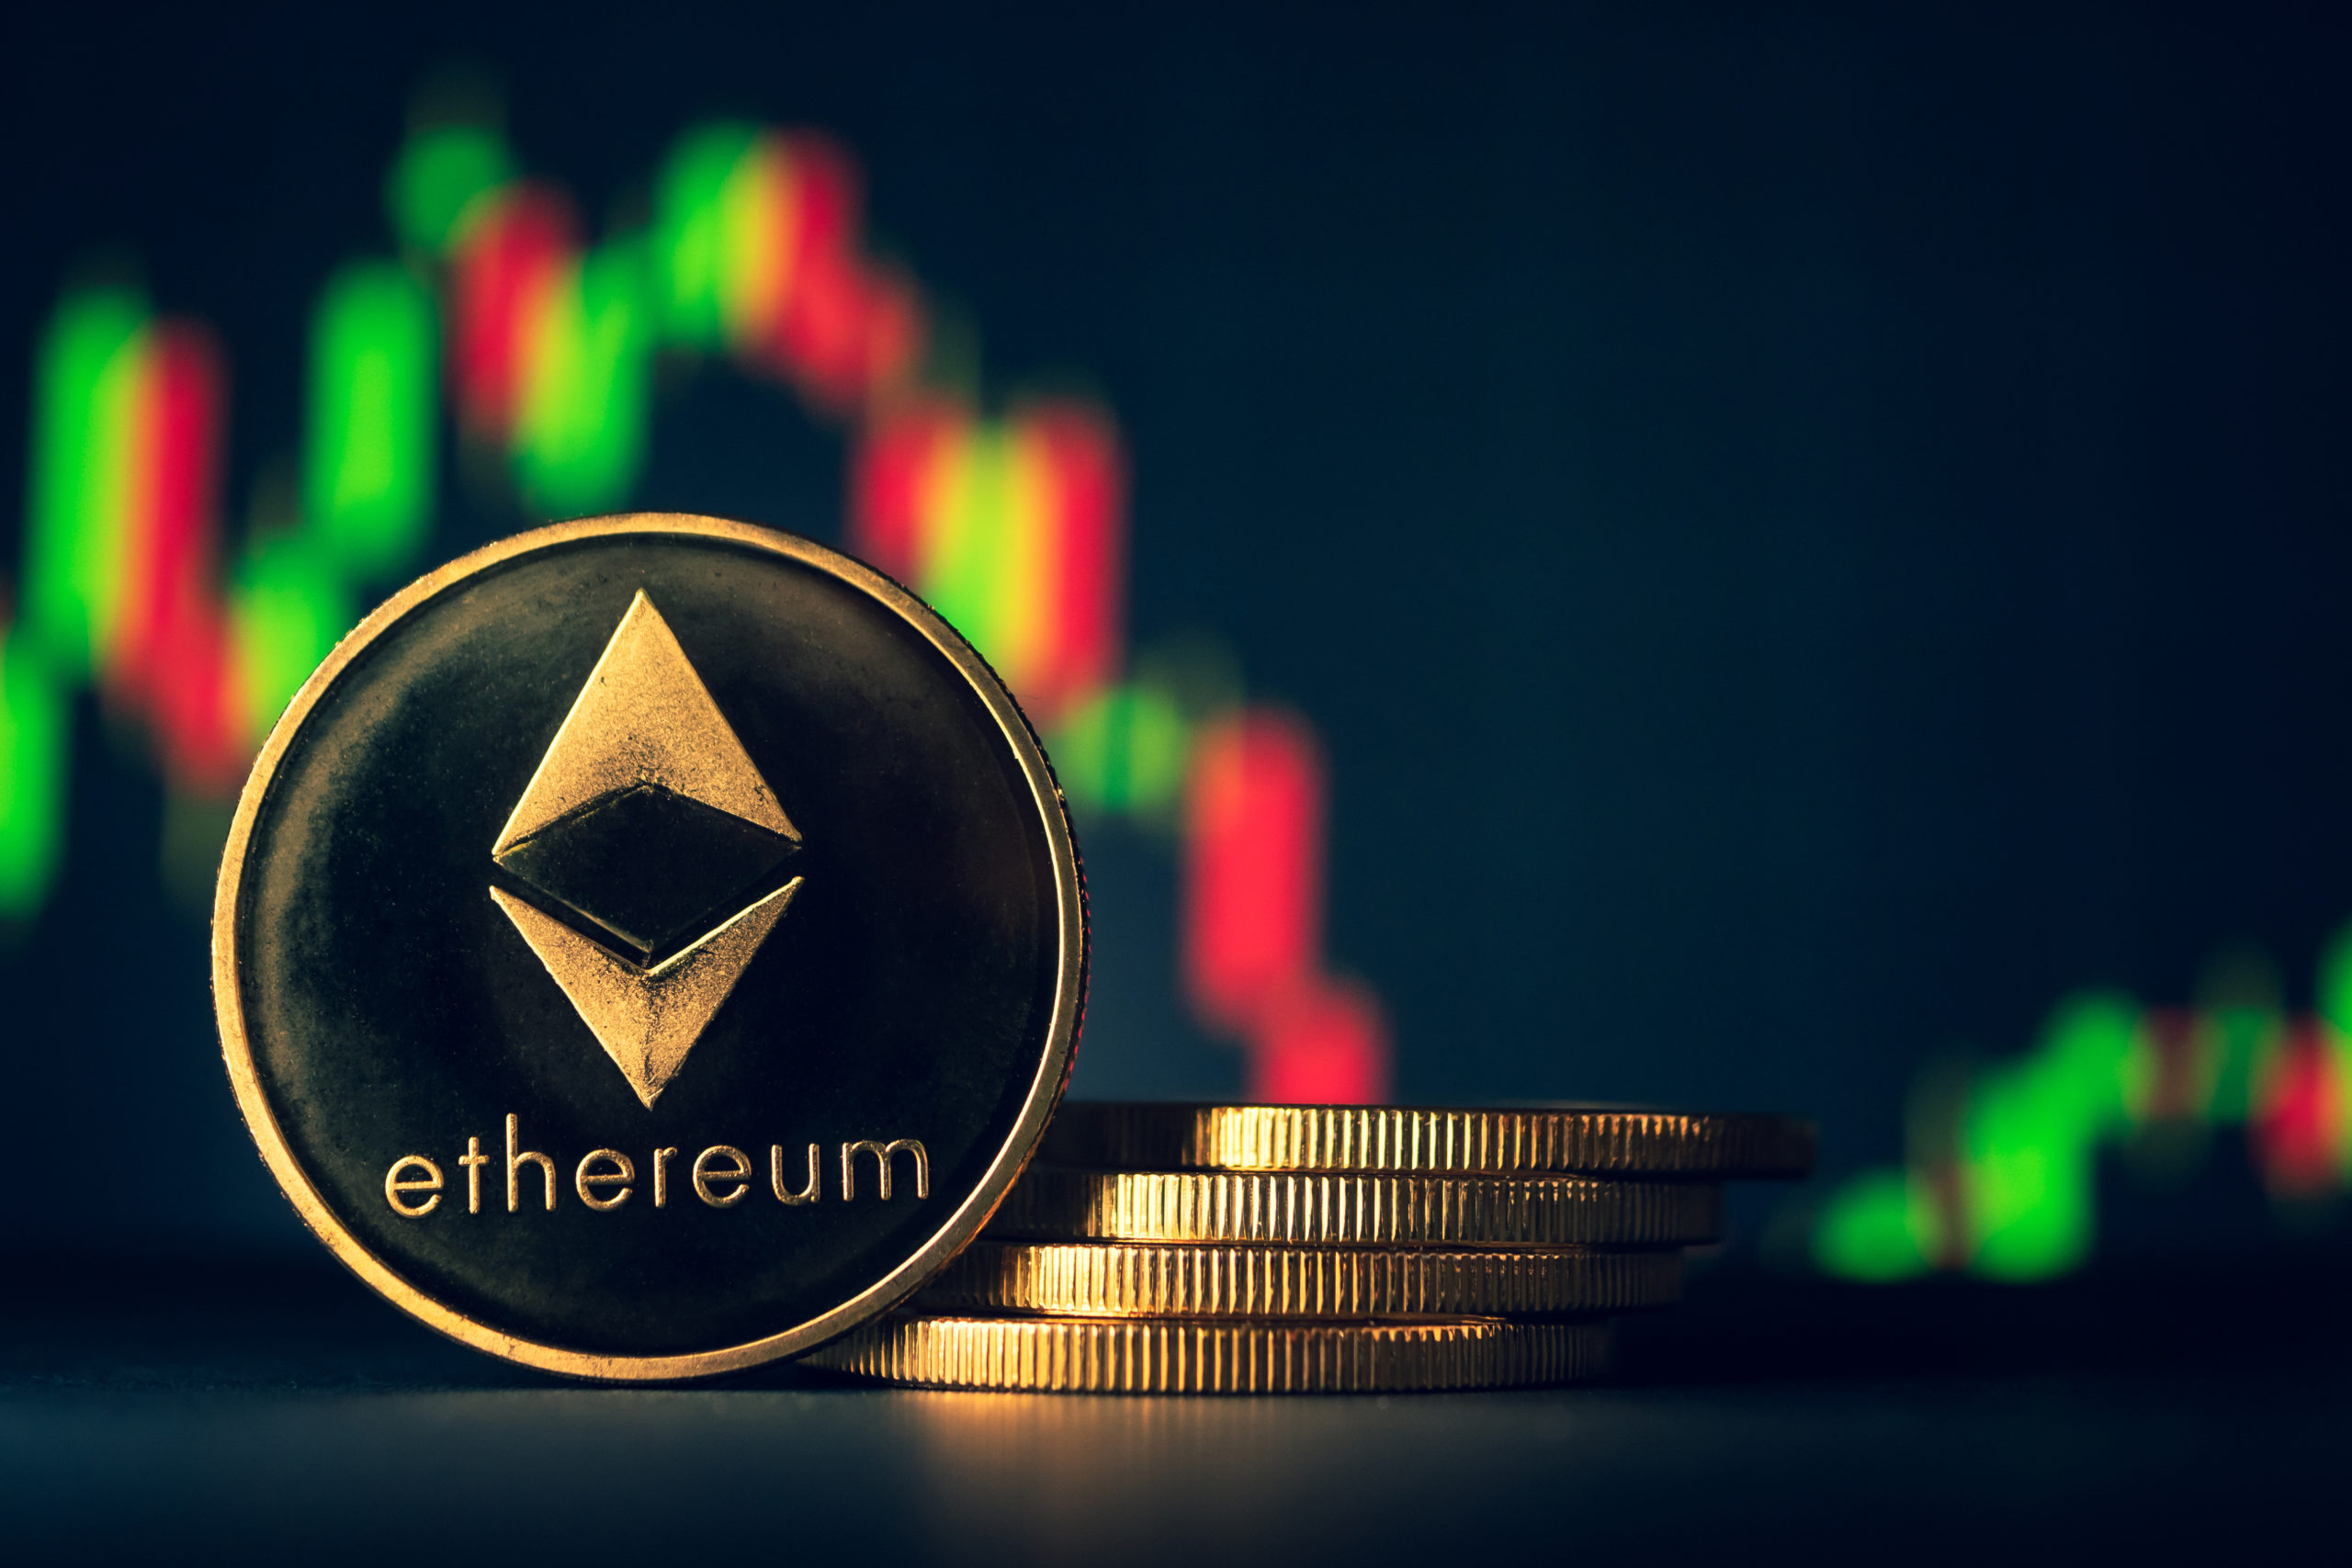 McGlone: Ethereum’s switch to PoS may be a factor for enduring ETH price appreciation